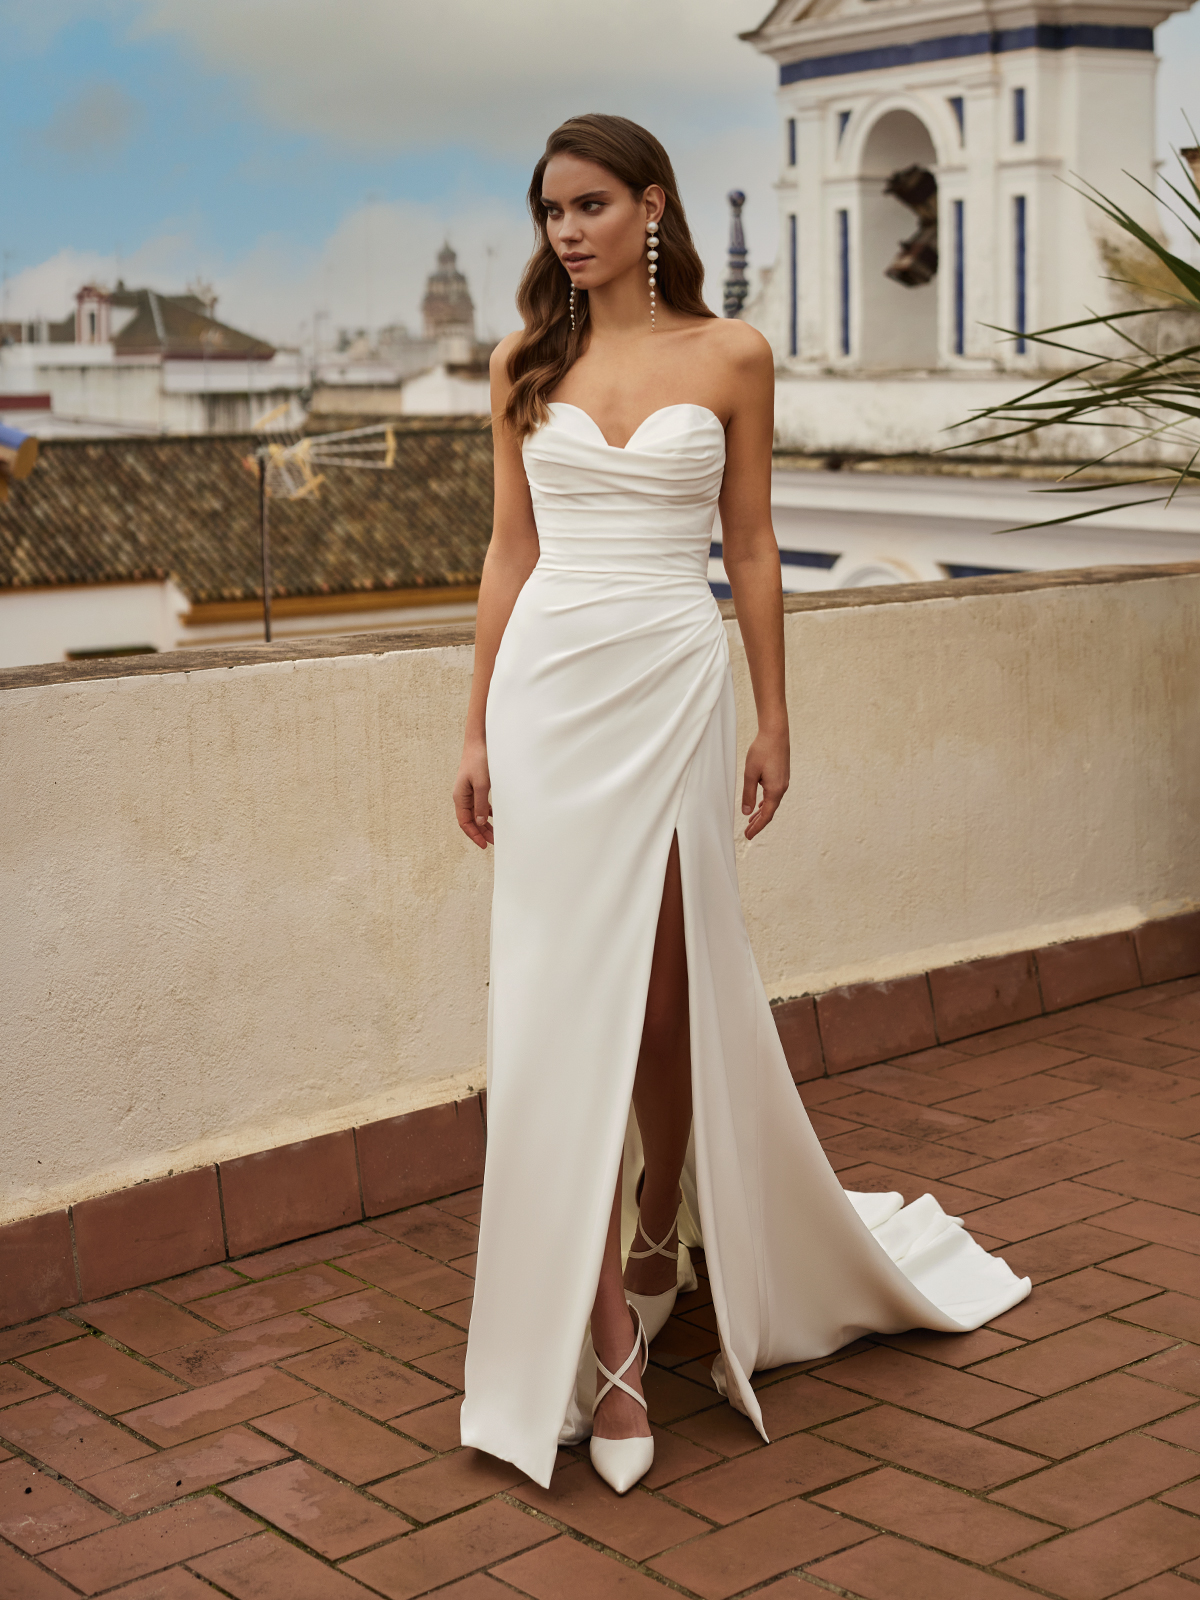 Bride outside on a balcony wearing a simple crepe bridal gown with a high leg slit